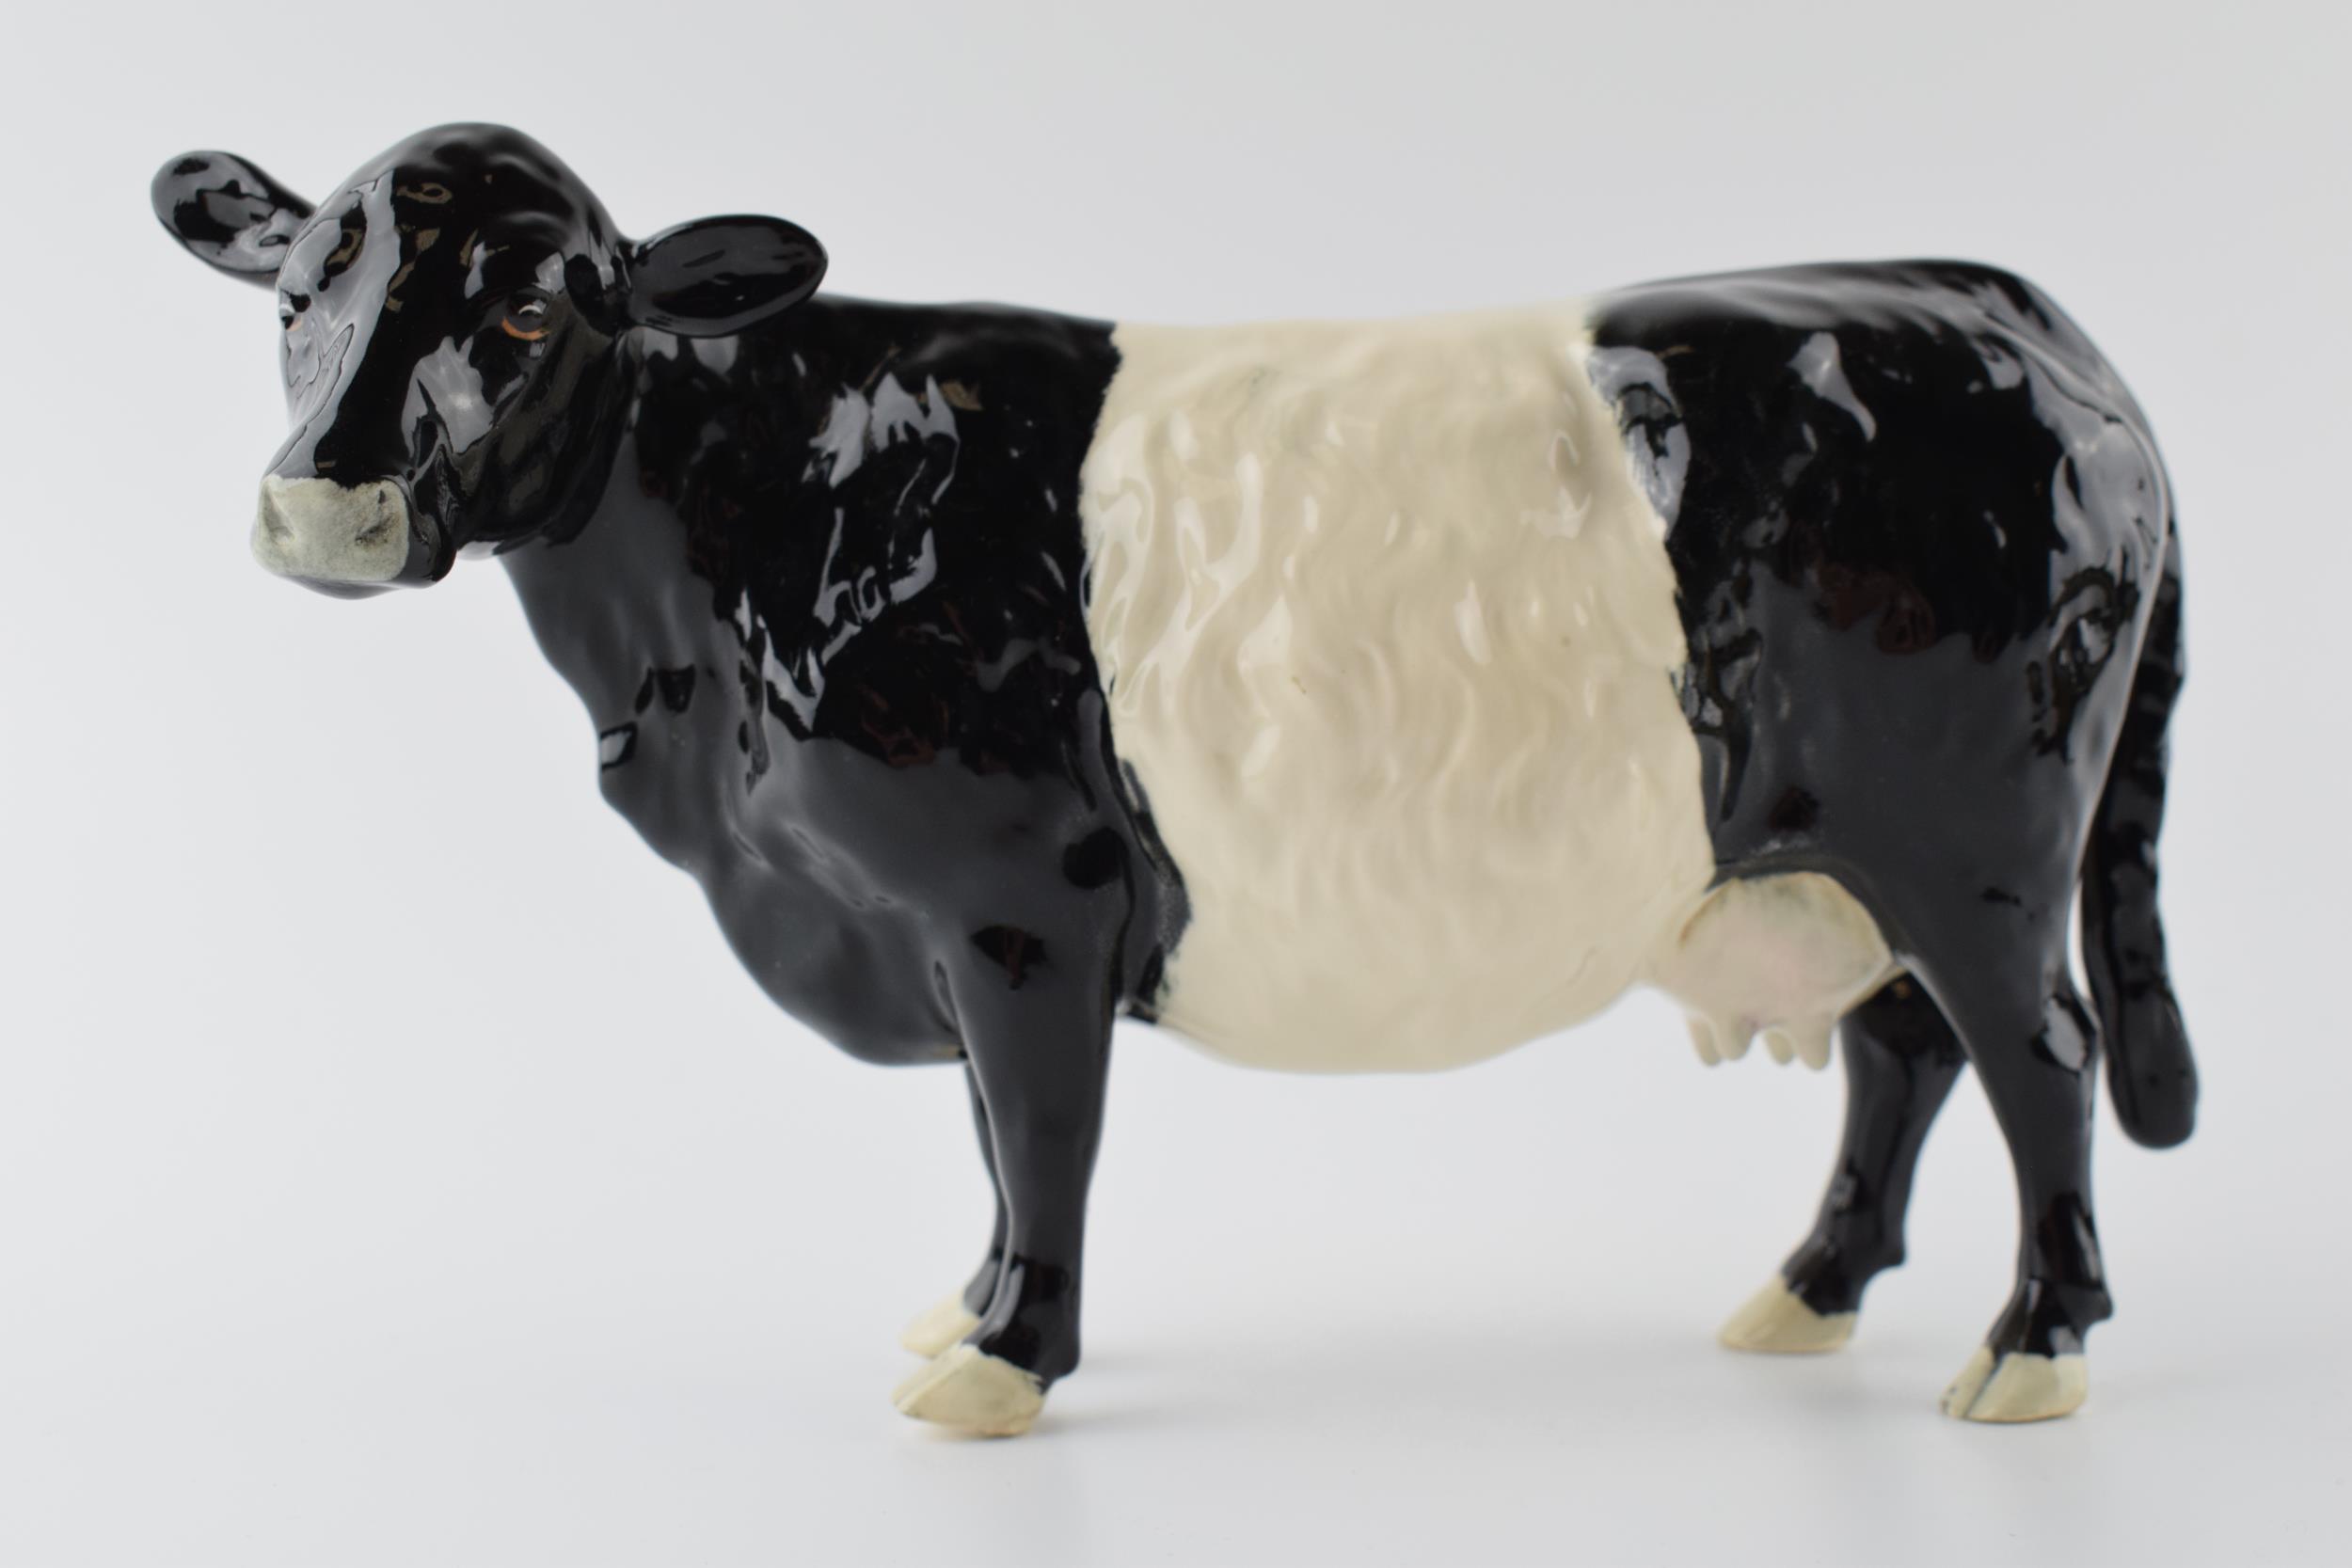 Beswick Belted Galloway Cow 4113A. In good condition with no obvious damage or restoration.